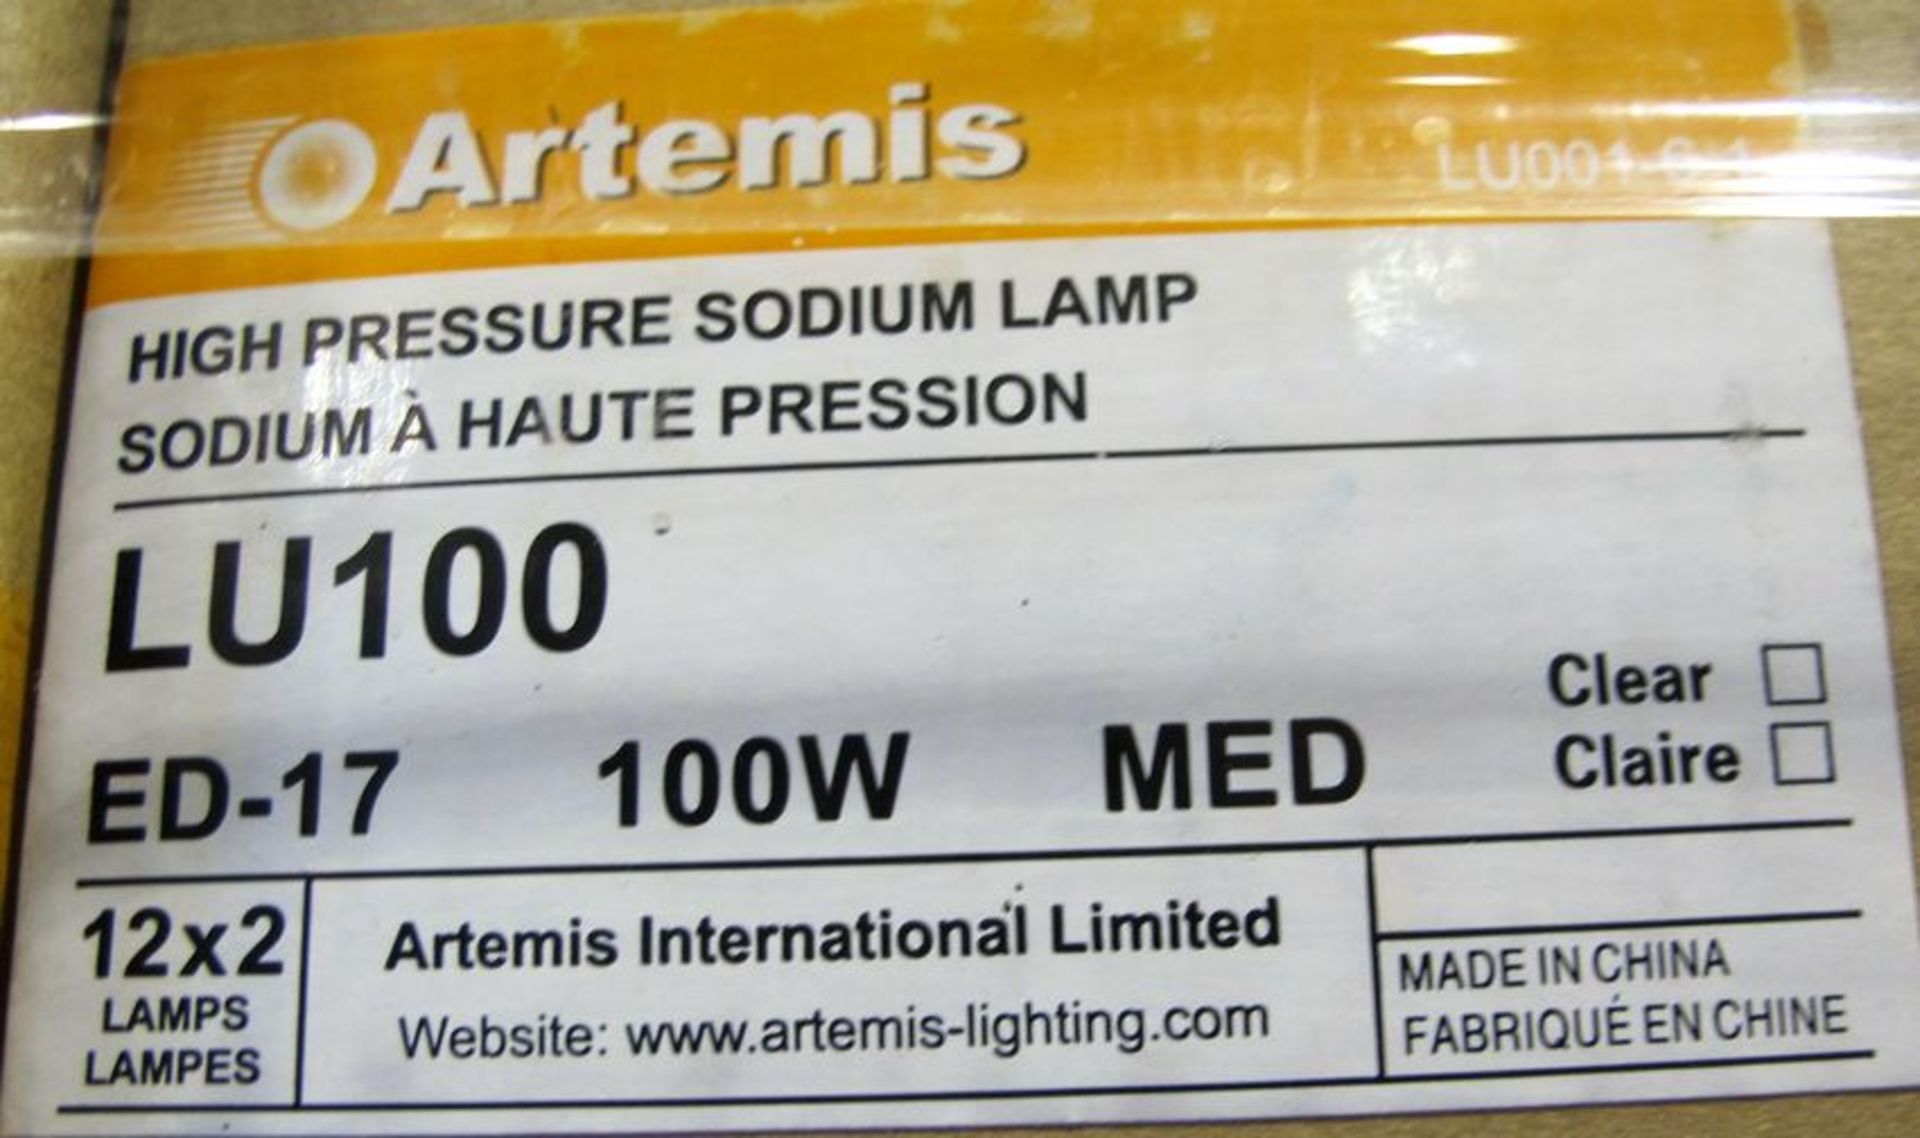 LOT OF (12) PALLETS OF ASST. ARTEMIS HIGH PRESSURE SODIUM LAMPS (APPROX. 1,000 BULBS) W/ ASST. - Image 4 of 13